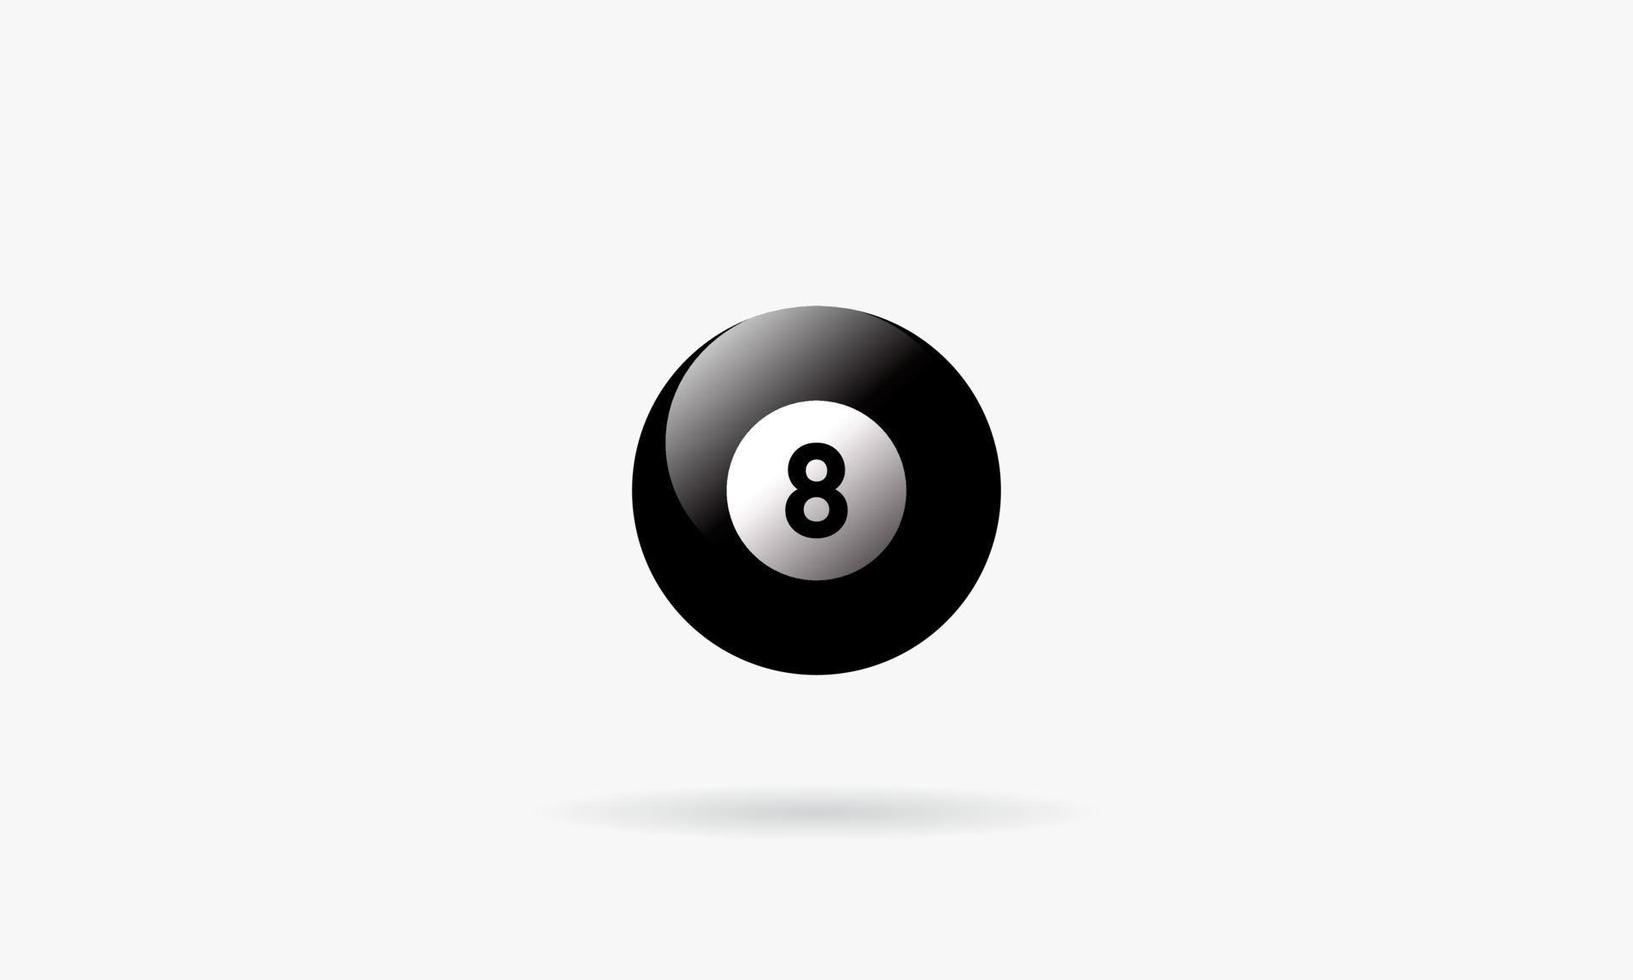 eight ball vector illustration. isolated on white background. creative icon.